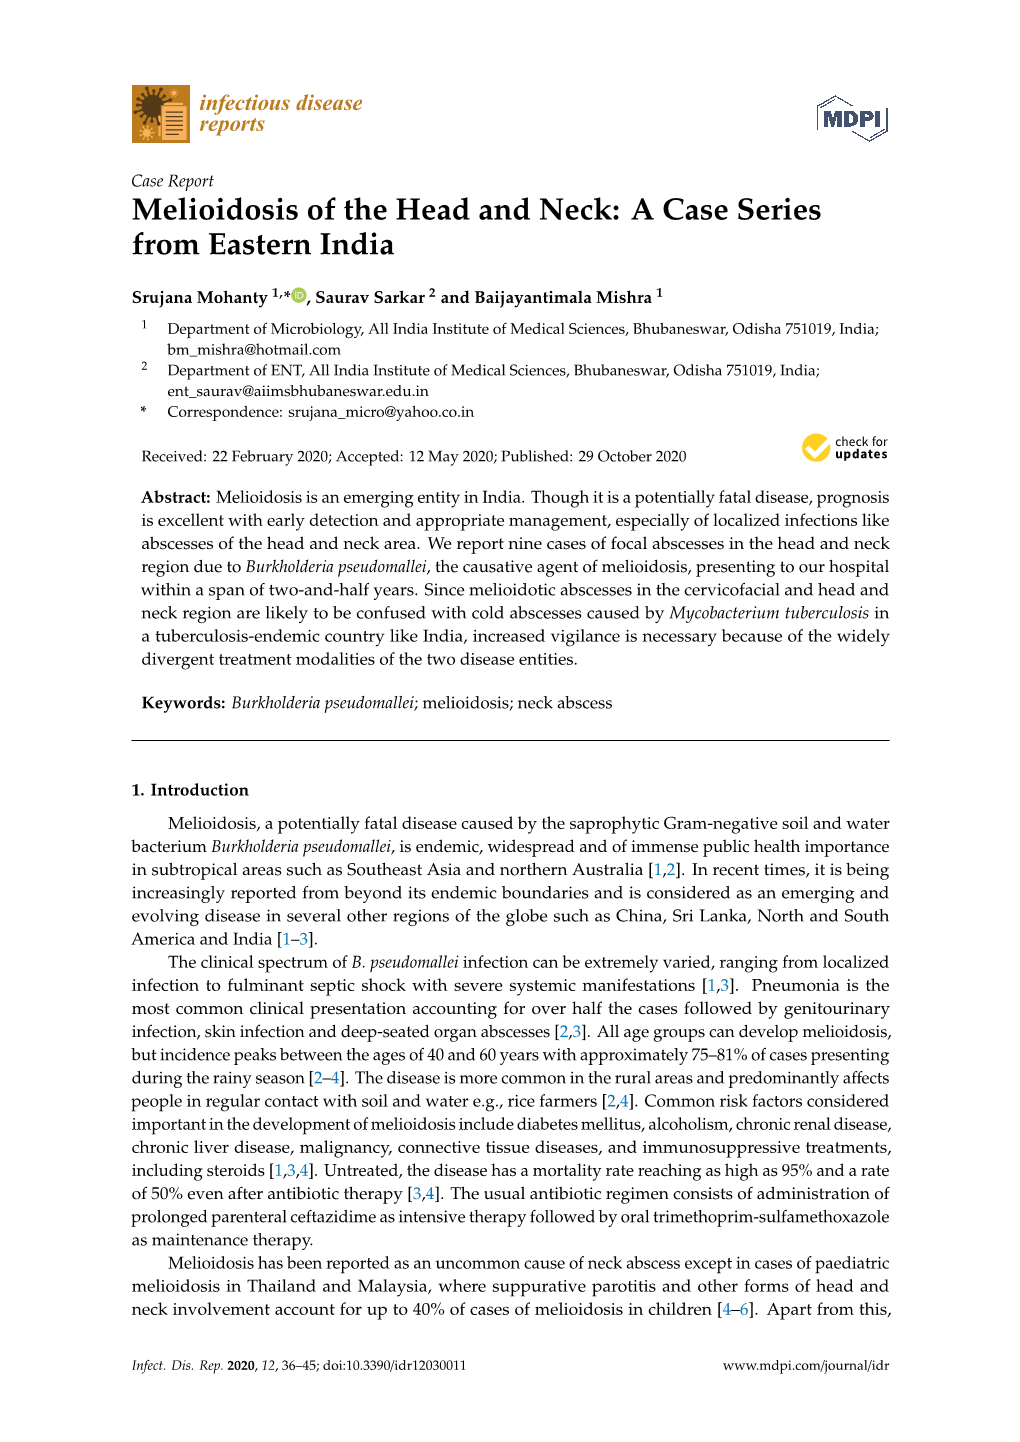 Melioidosis of the Head and Neck: a Case Series from Eastern India